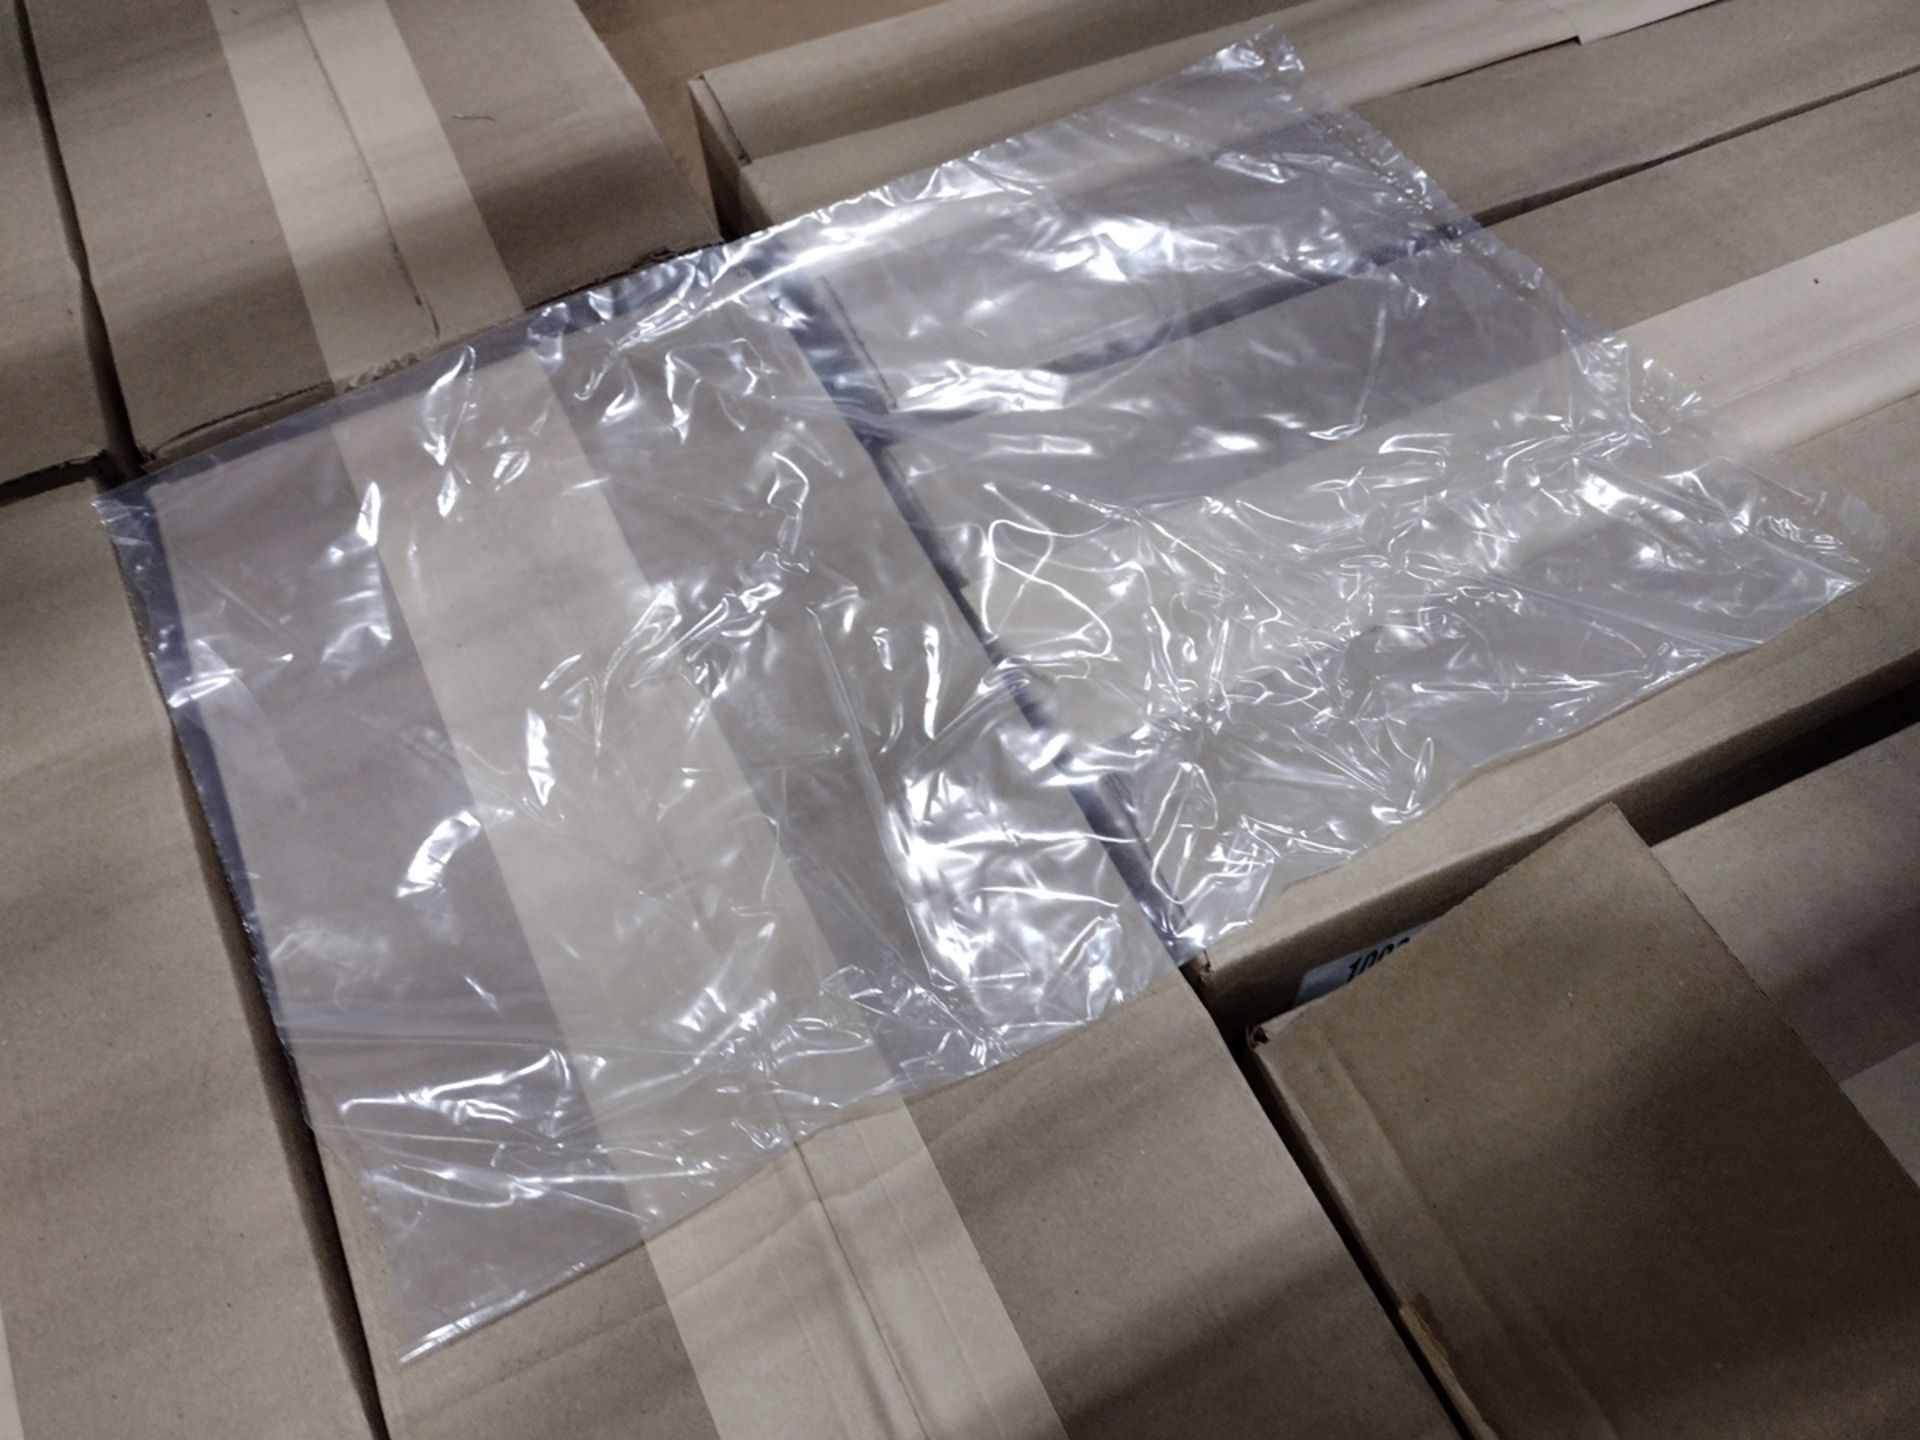 Group of Plastic and Paper Bags